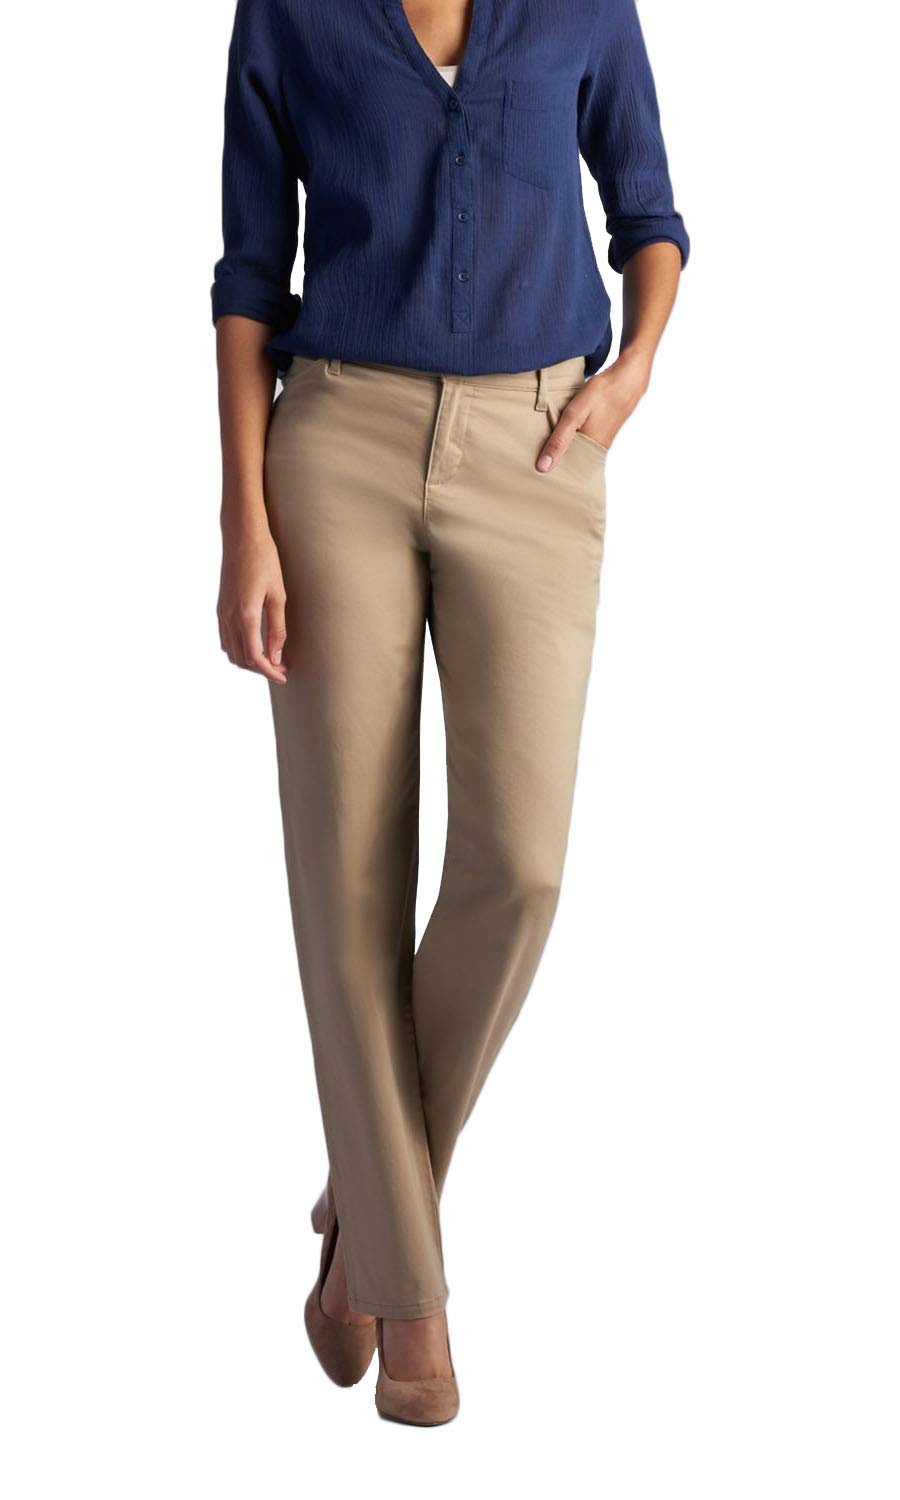 Lee Women's Relaxed Fit All Day Straight Leg Pant Flax 16 Long